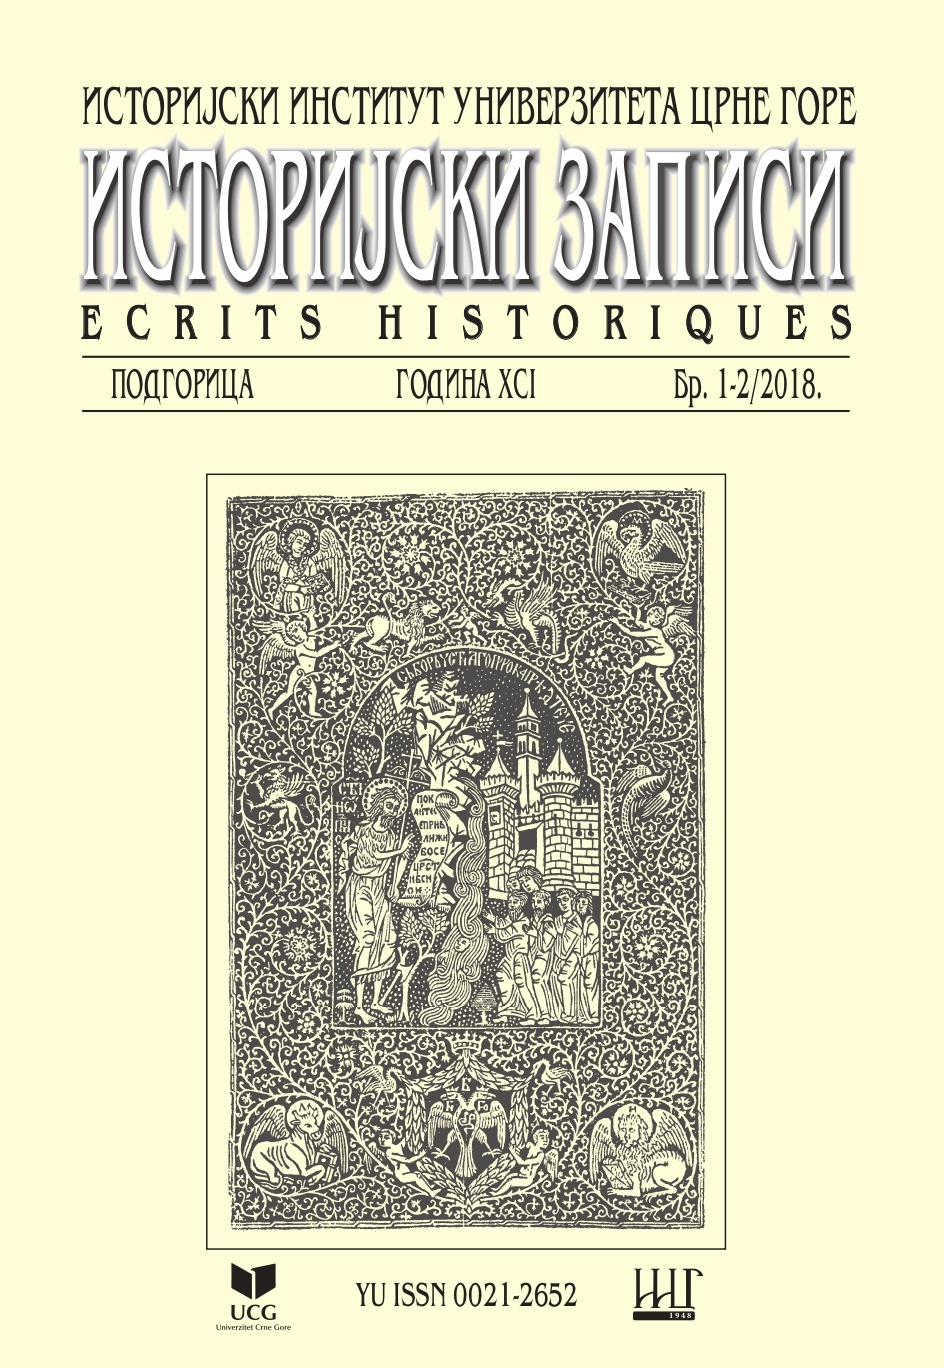 Montenegrin Period of the Life and Work of
Pavel Apollonovich Rovinsky in Scientific
Research and Archive Materials Cover Image